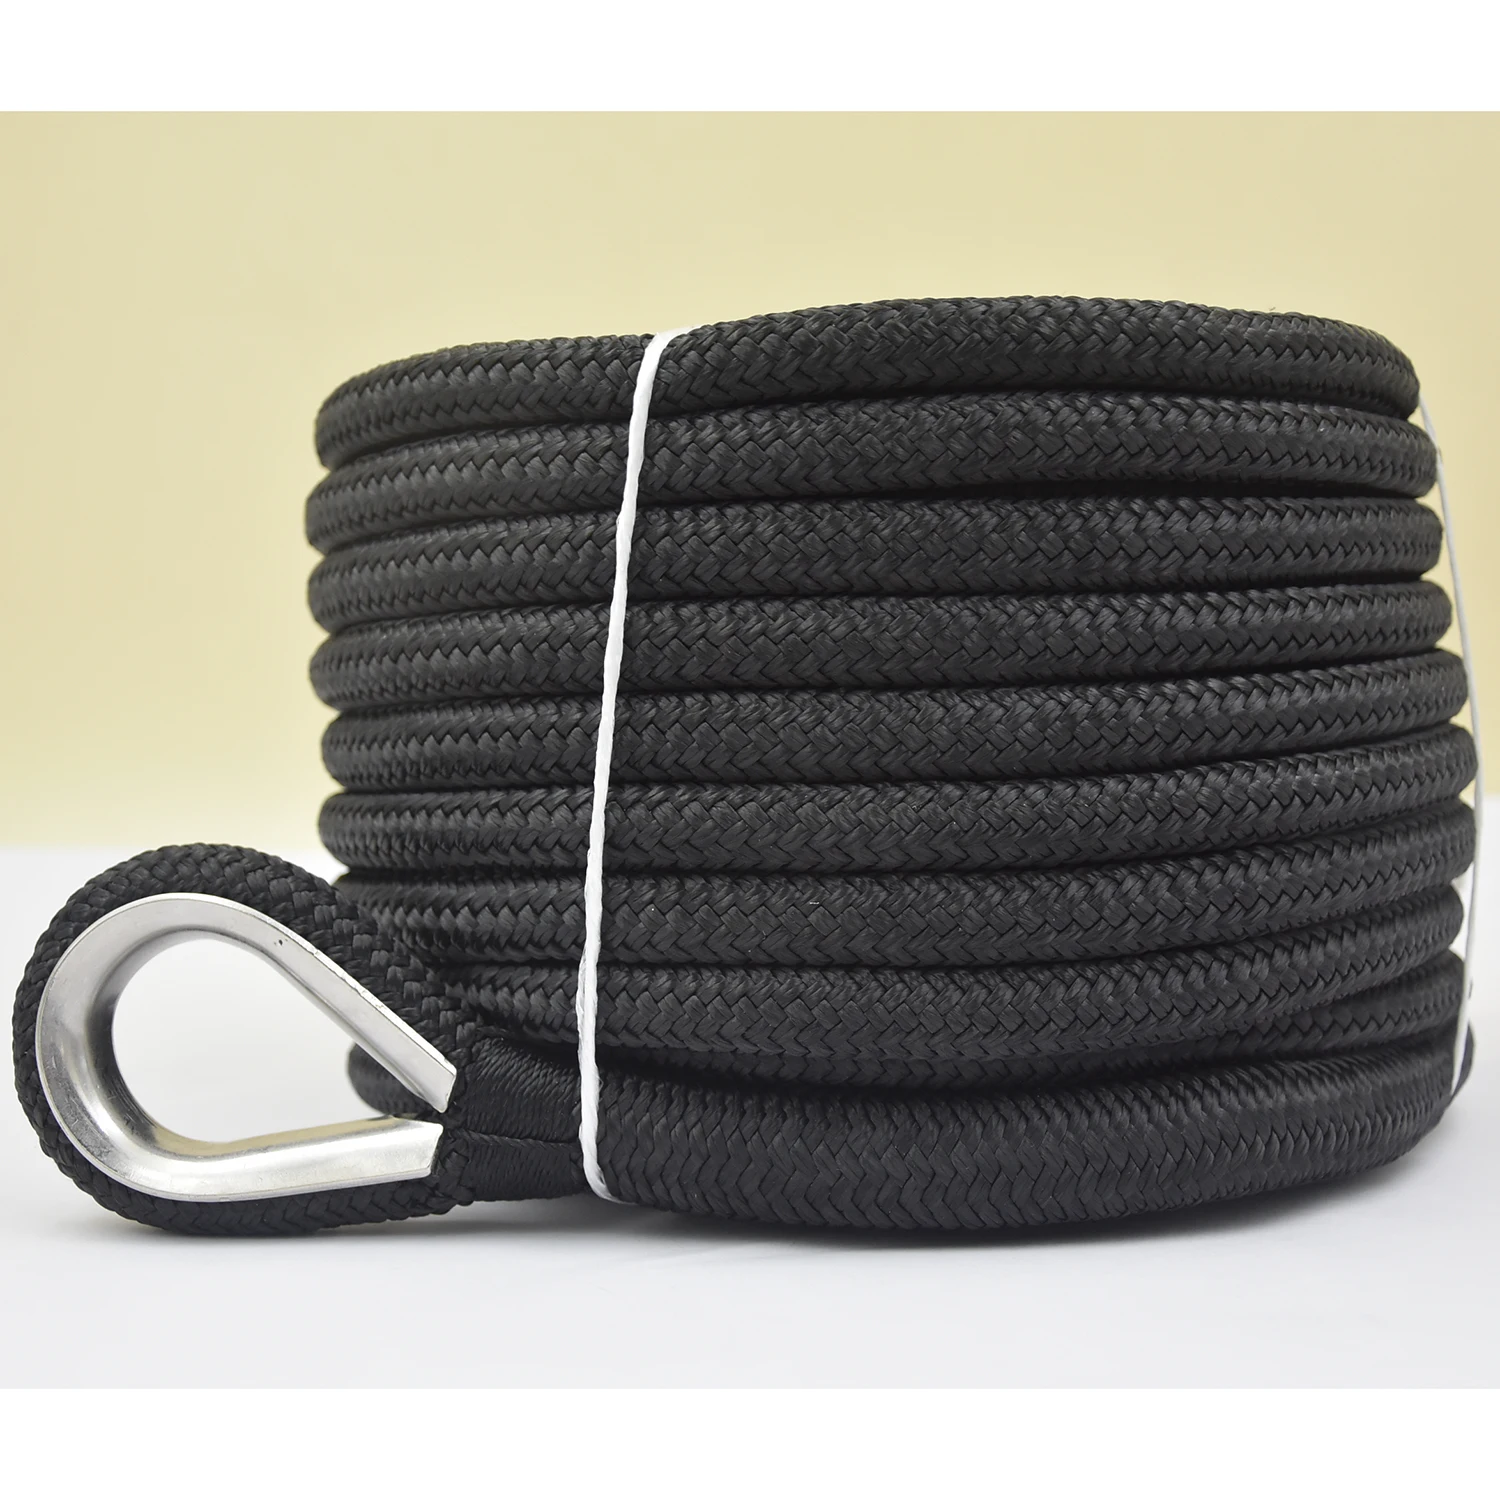 Top Performance customized package double braided thick diameter nylon polyester mooring dock line factory price